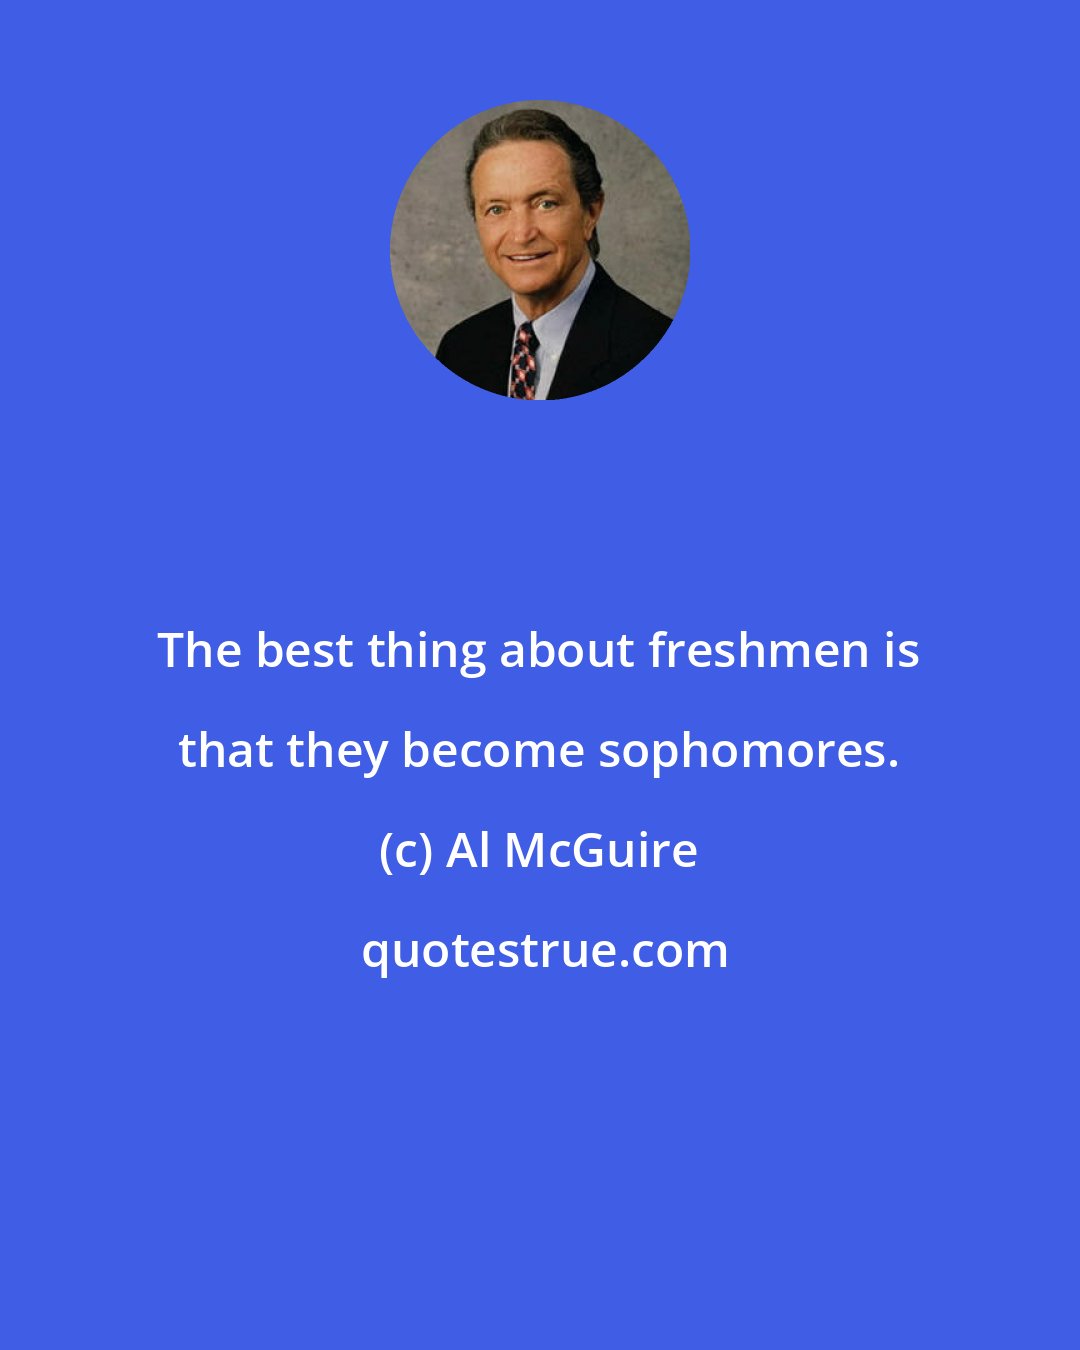 Al McGuire: The best thing about freshmen is that they become sophomores.